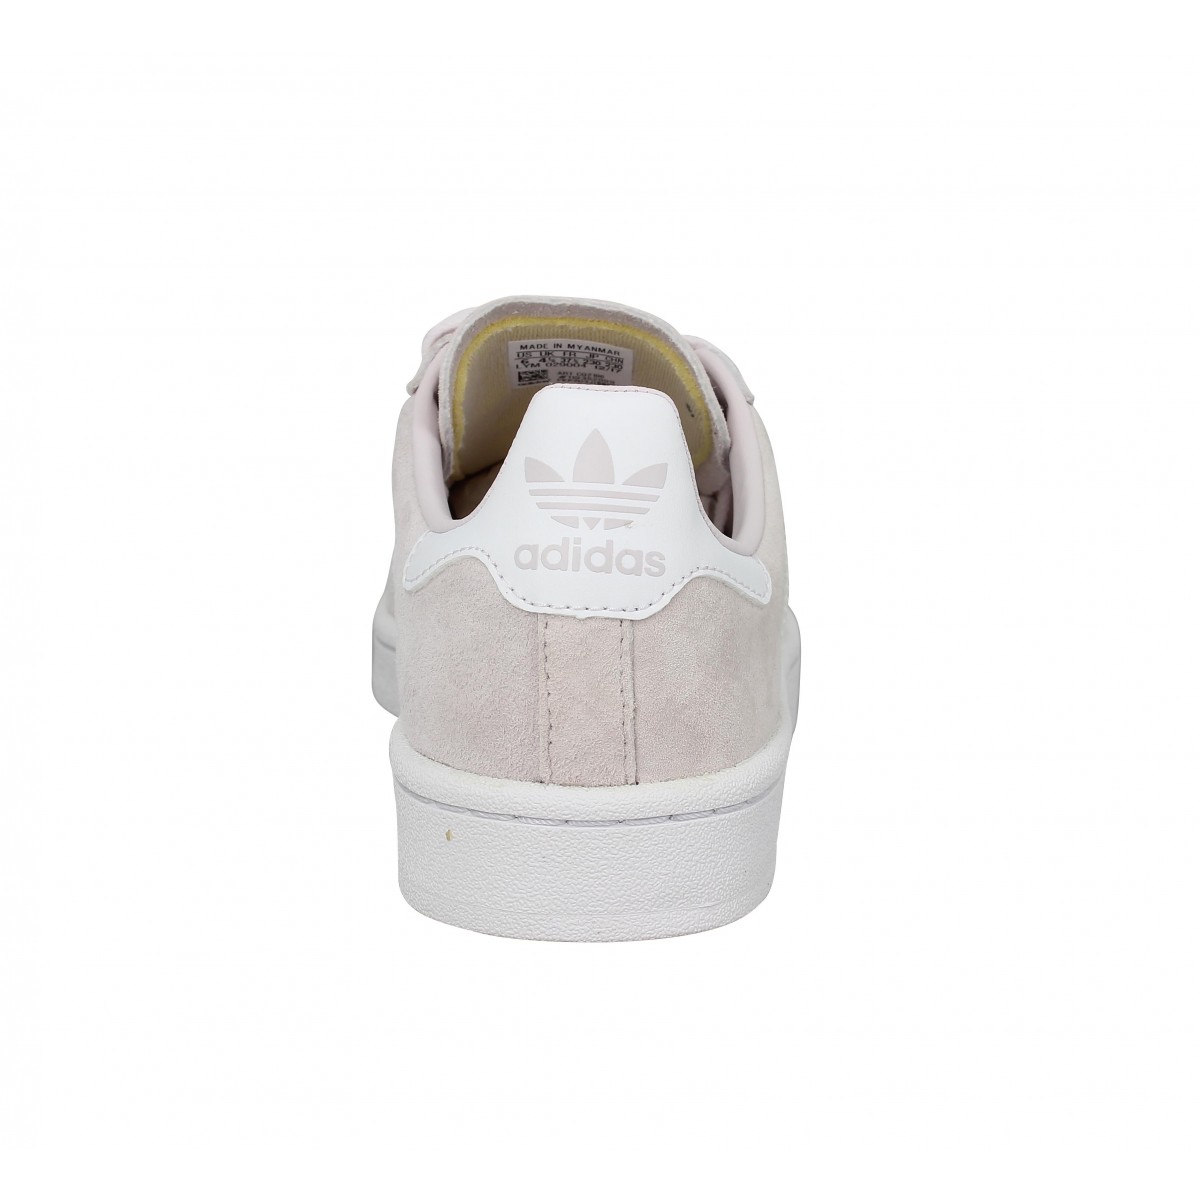 Chaussures Adidas campus velours femme rose pale femme | Fanny chaussures